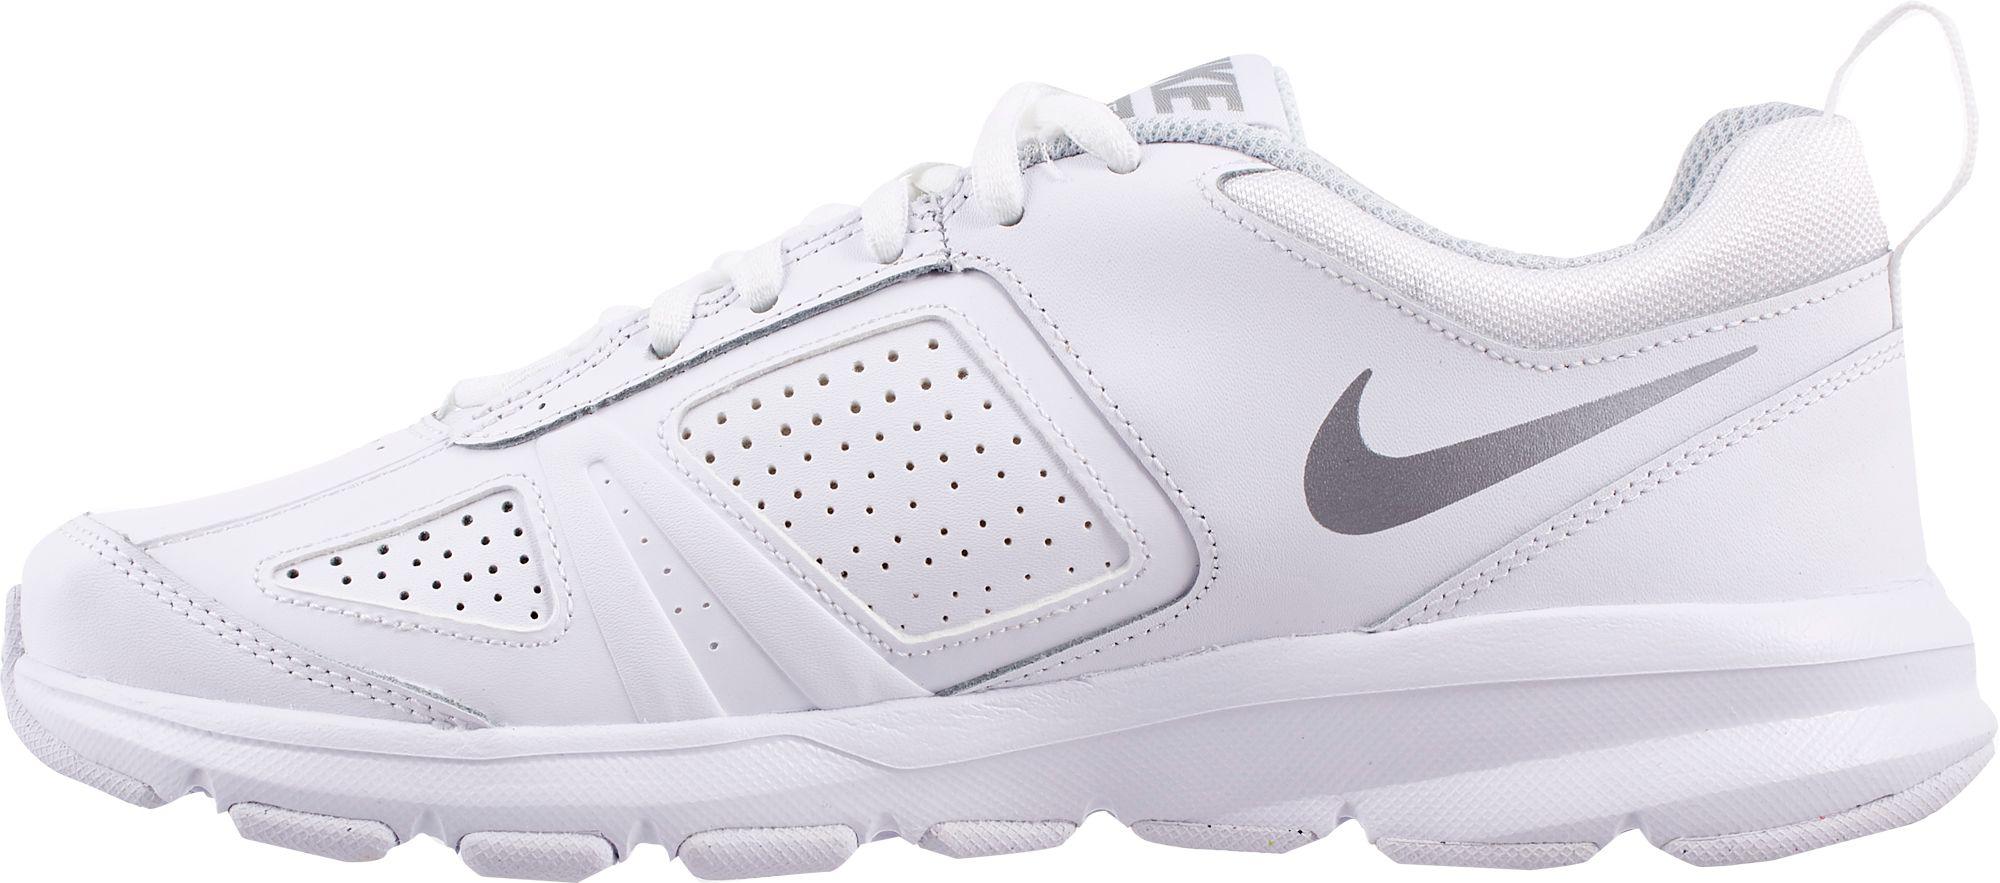 Nike Leather T-lite Xi Training Shoes in White/Grey (White) - Lyst